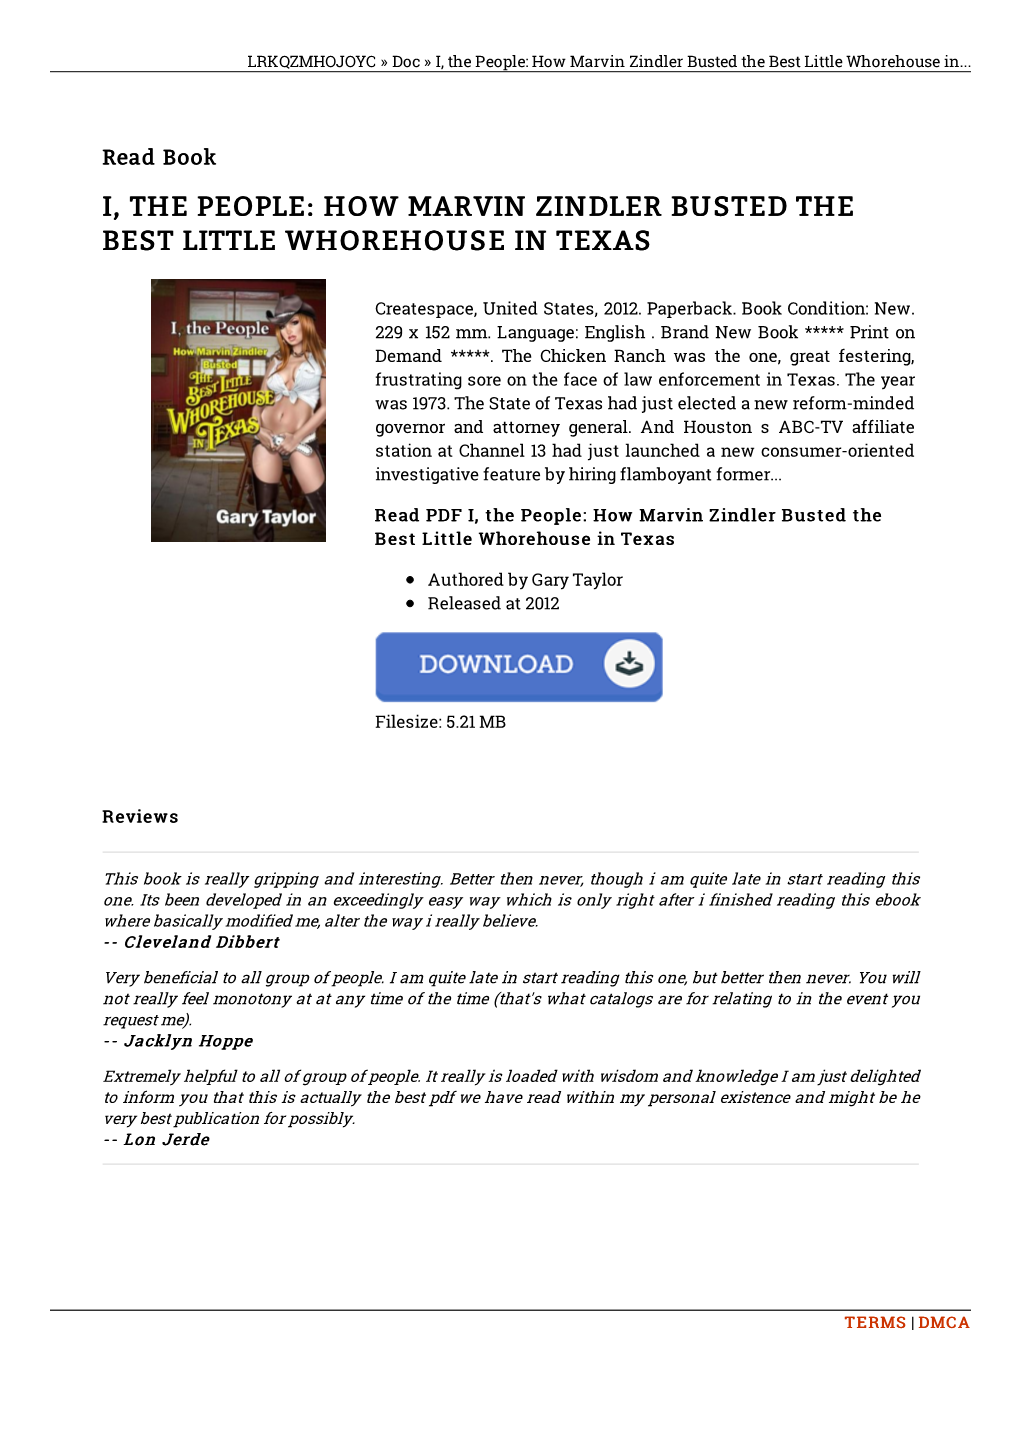 Find Ebook # I, the People: How Marvin Zindler Busted the Best Little Whorehouse in Texas